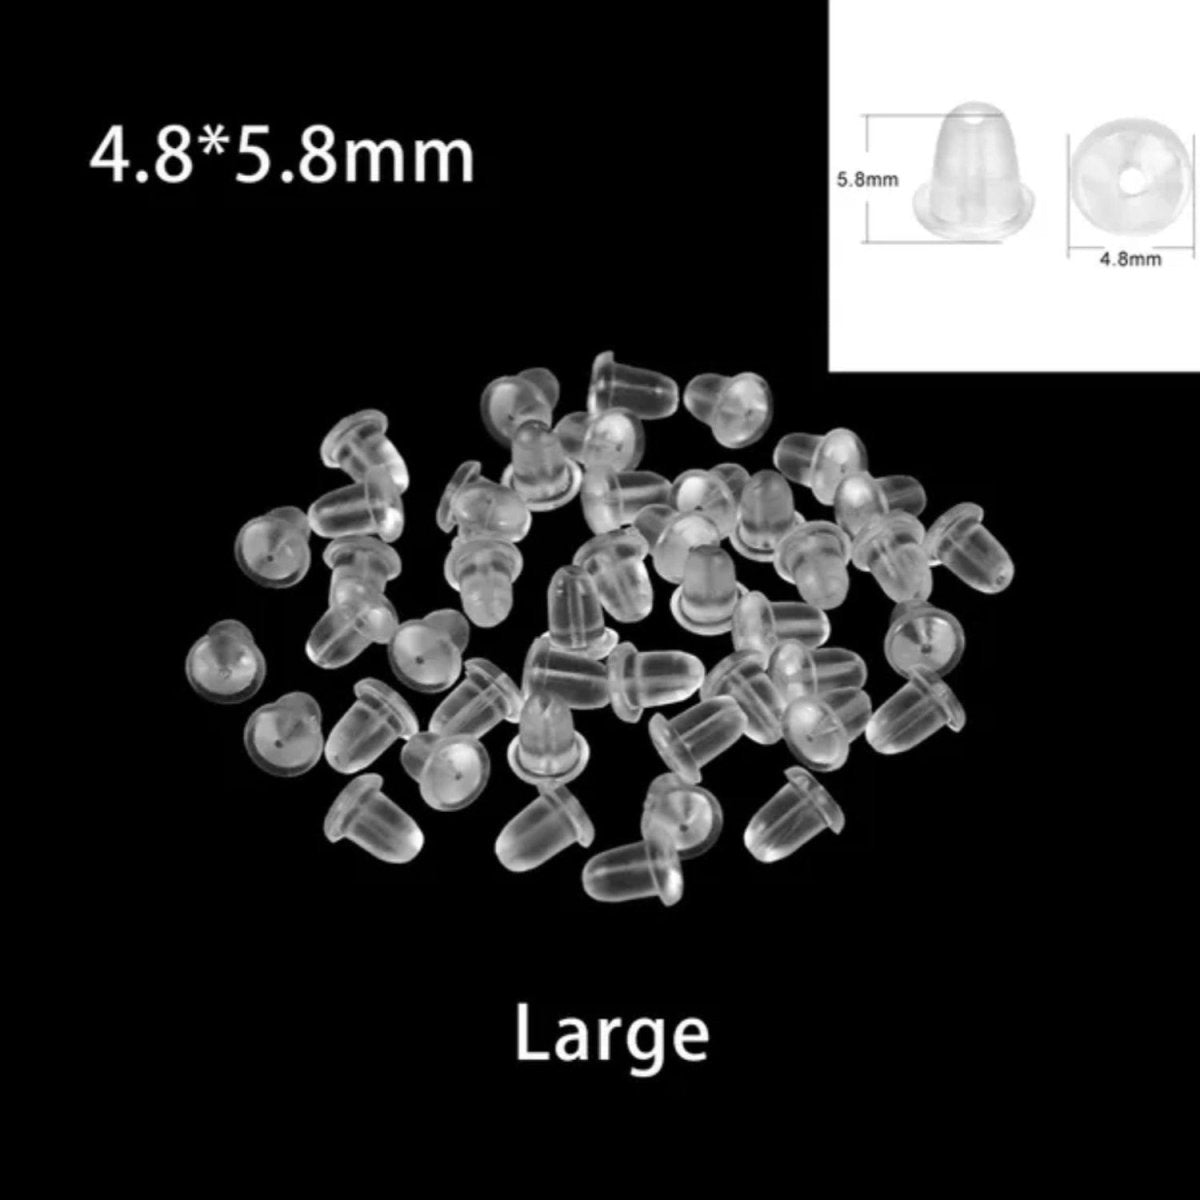 2000pcs Soft Silicone Rubber Earring Back Stoppers for Stud Earrings DIY Earring Findings Accessories Bullet Tube Ear Plugs - Large 4.8x5.8mm - - Asia Sell